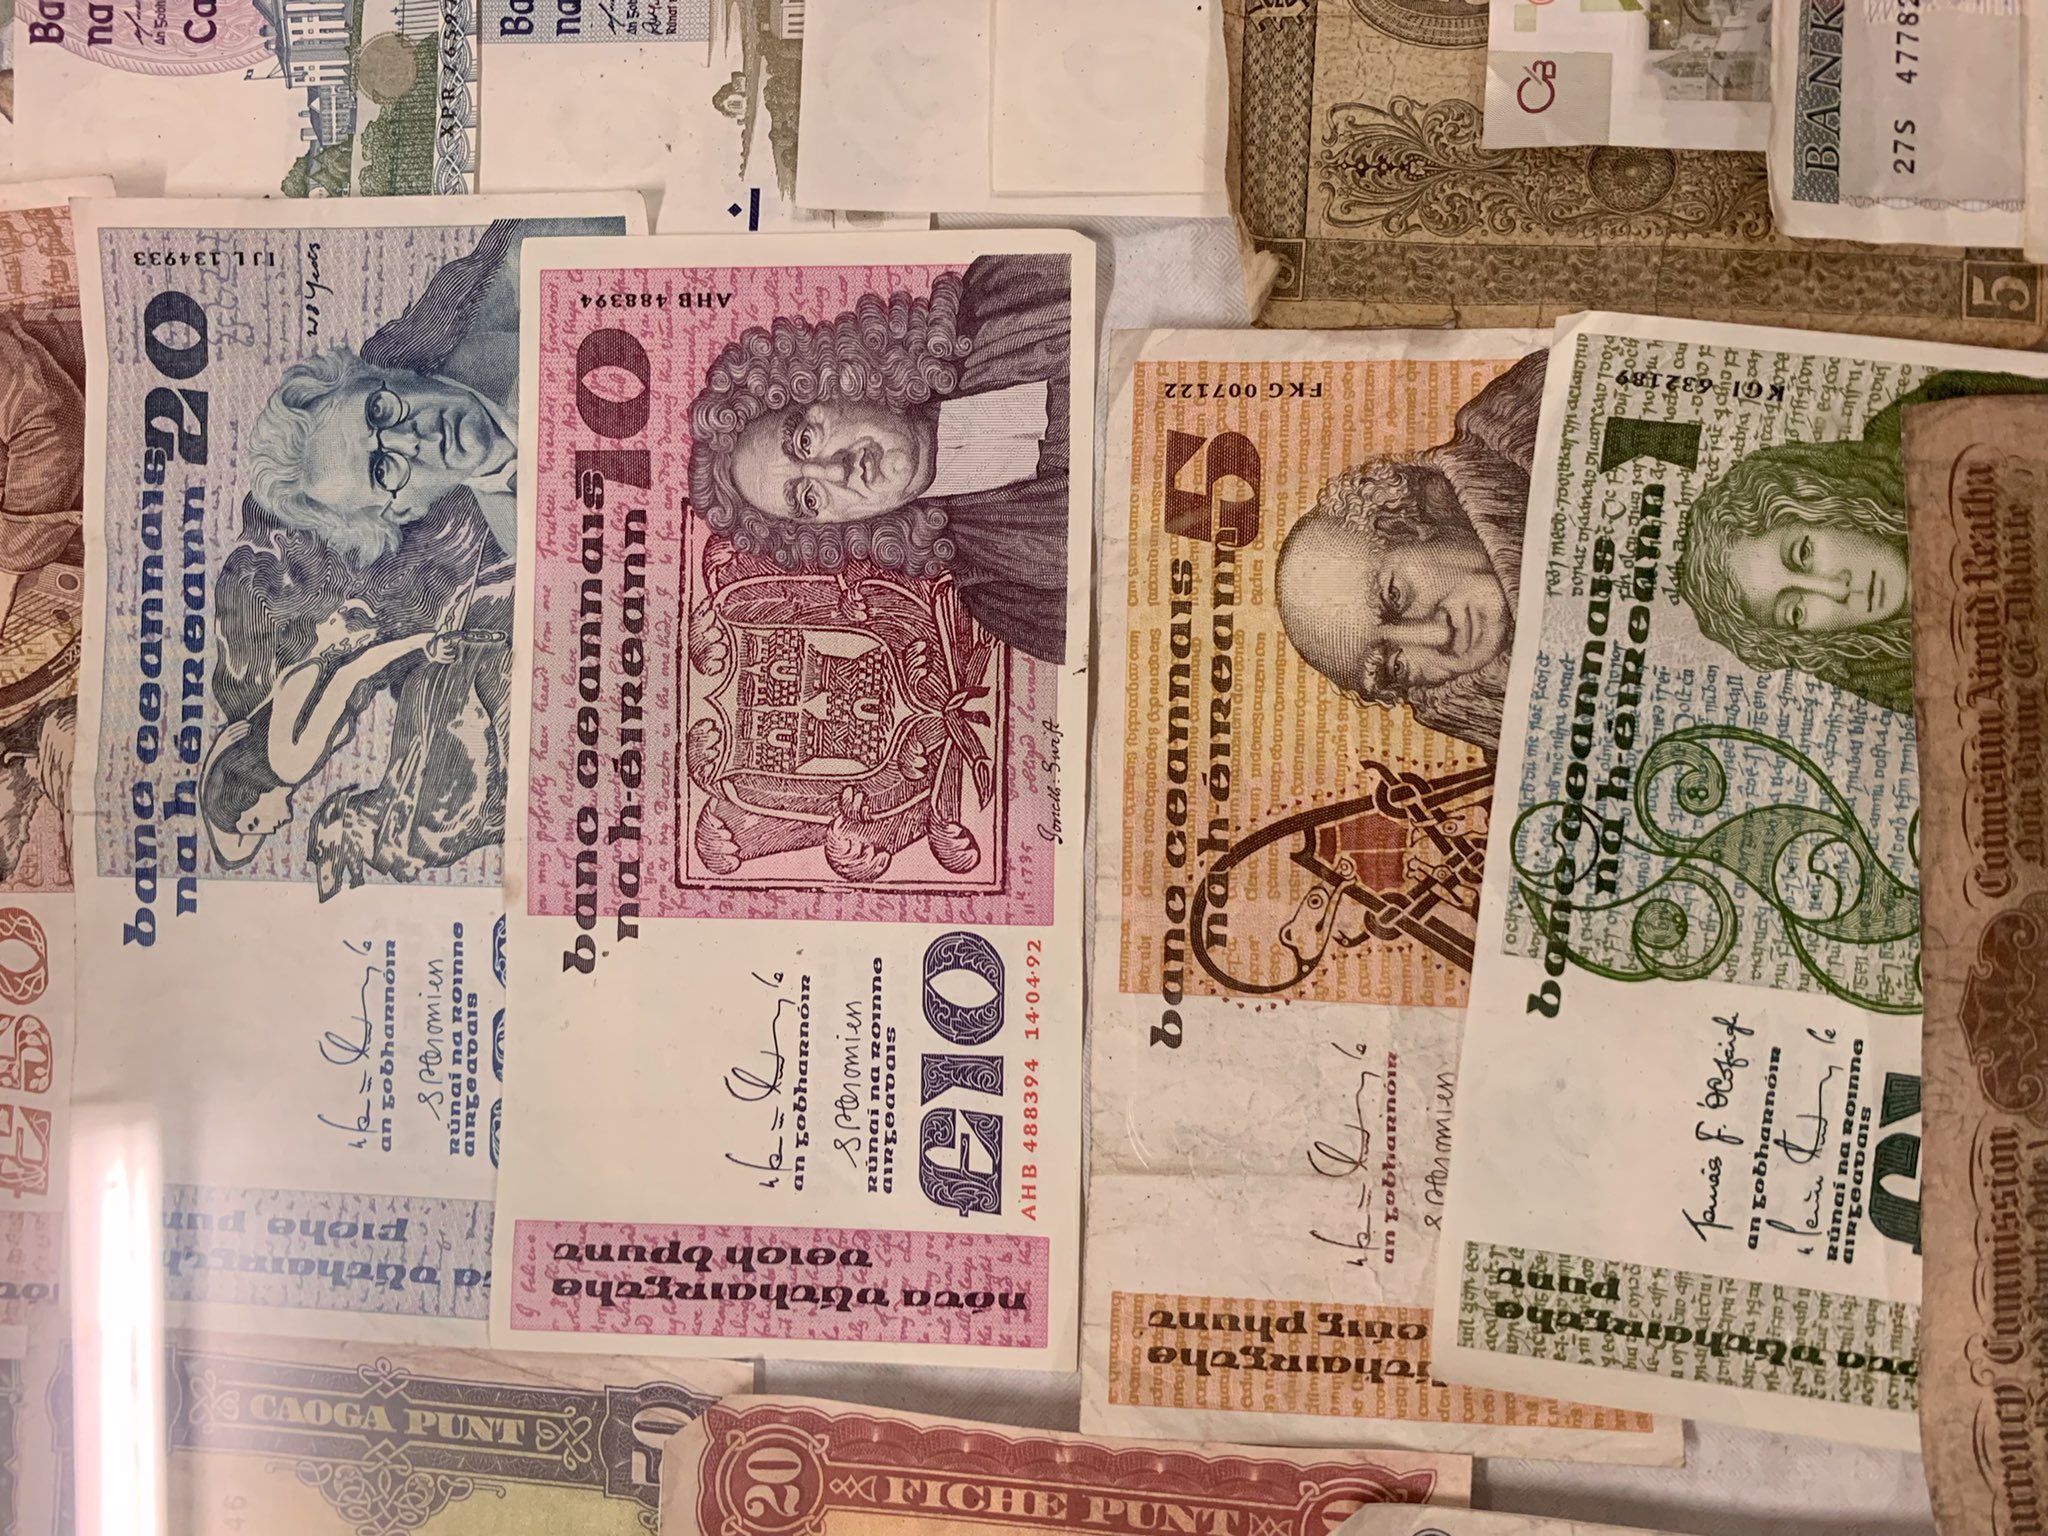 You are currently viewing Identity, Nostalgia, and Money: The Rich Cultural Legacy of Ireland’s Pre-Euro Currency | Irish Punt Series B Banknotes